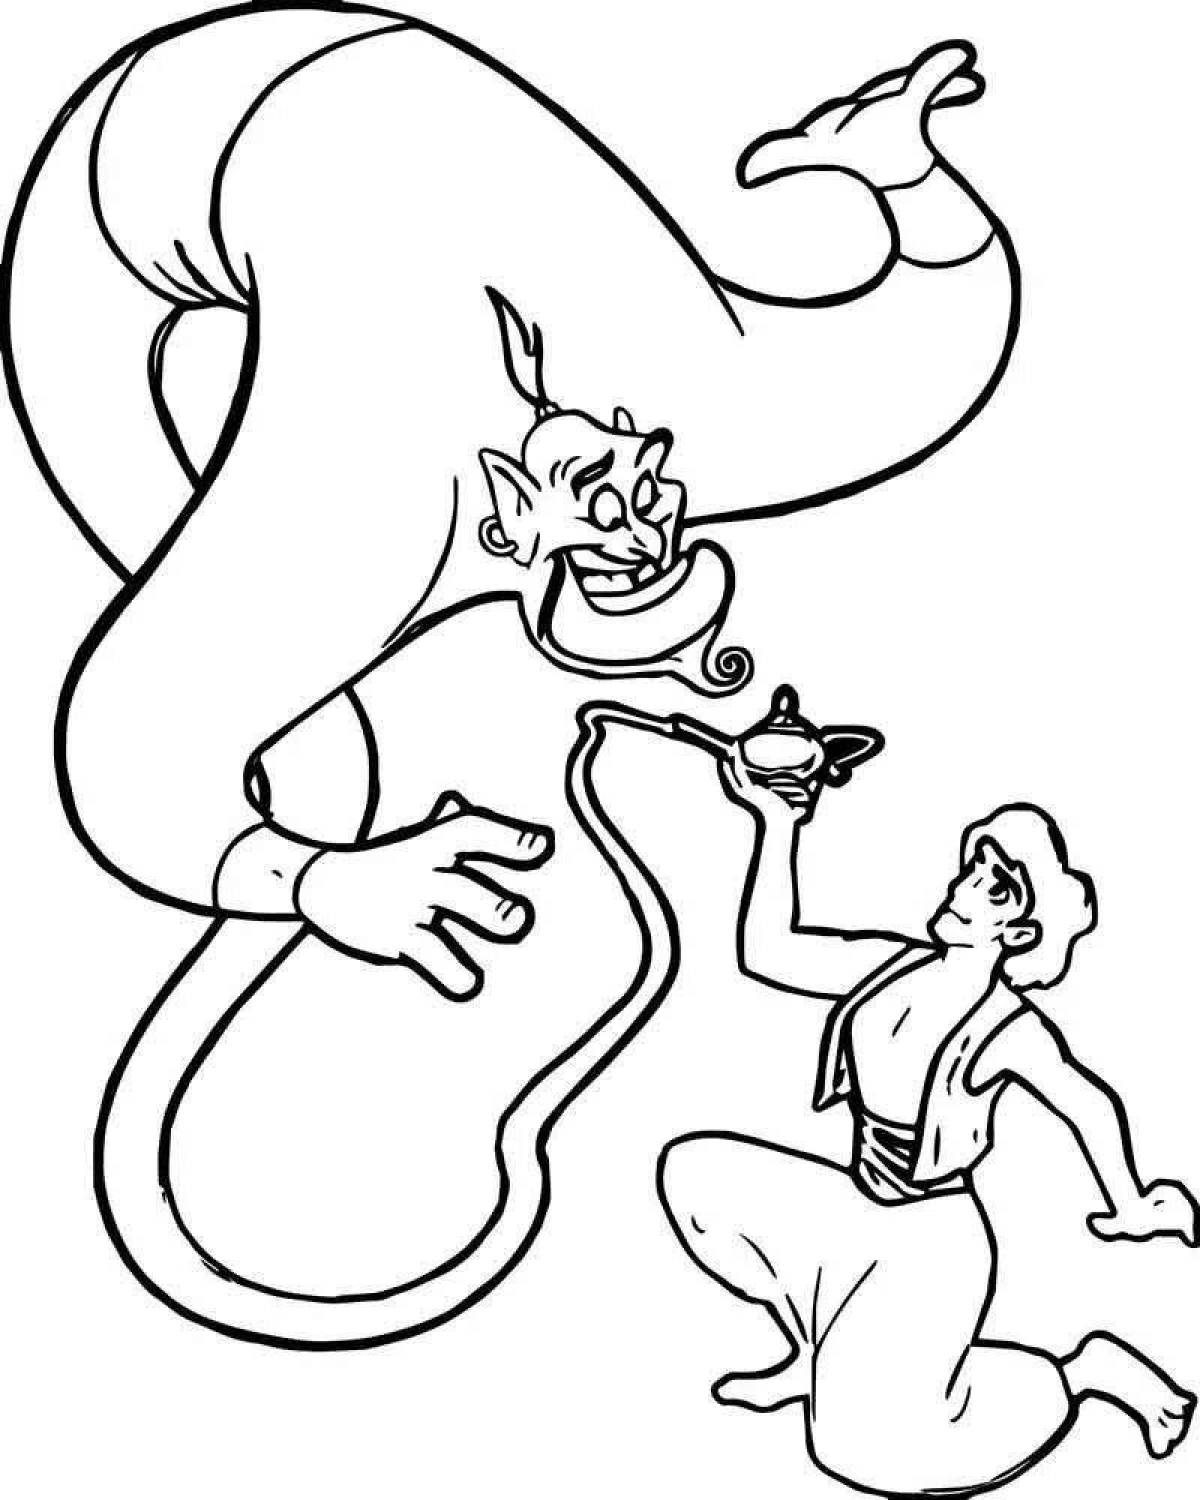 Glowing Genie Coloring Page